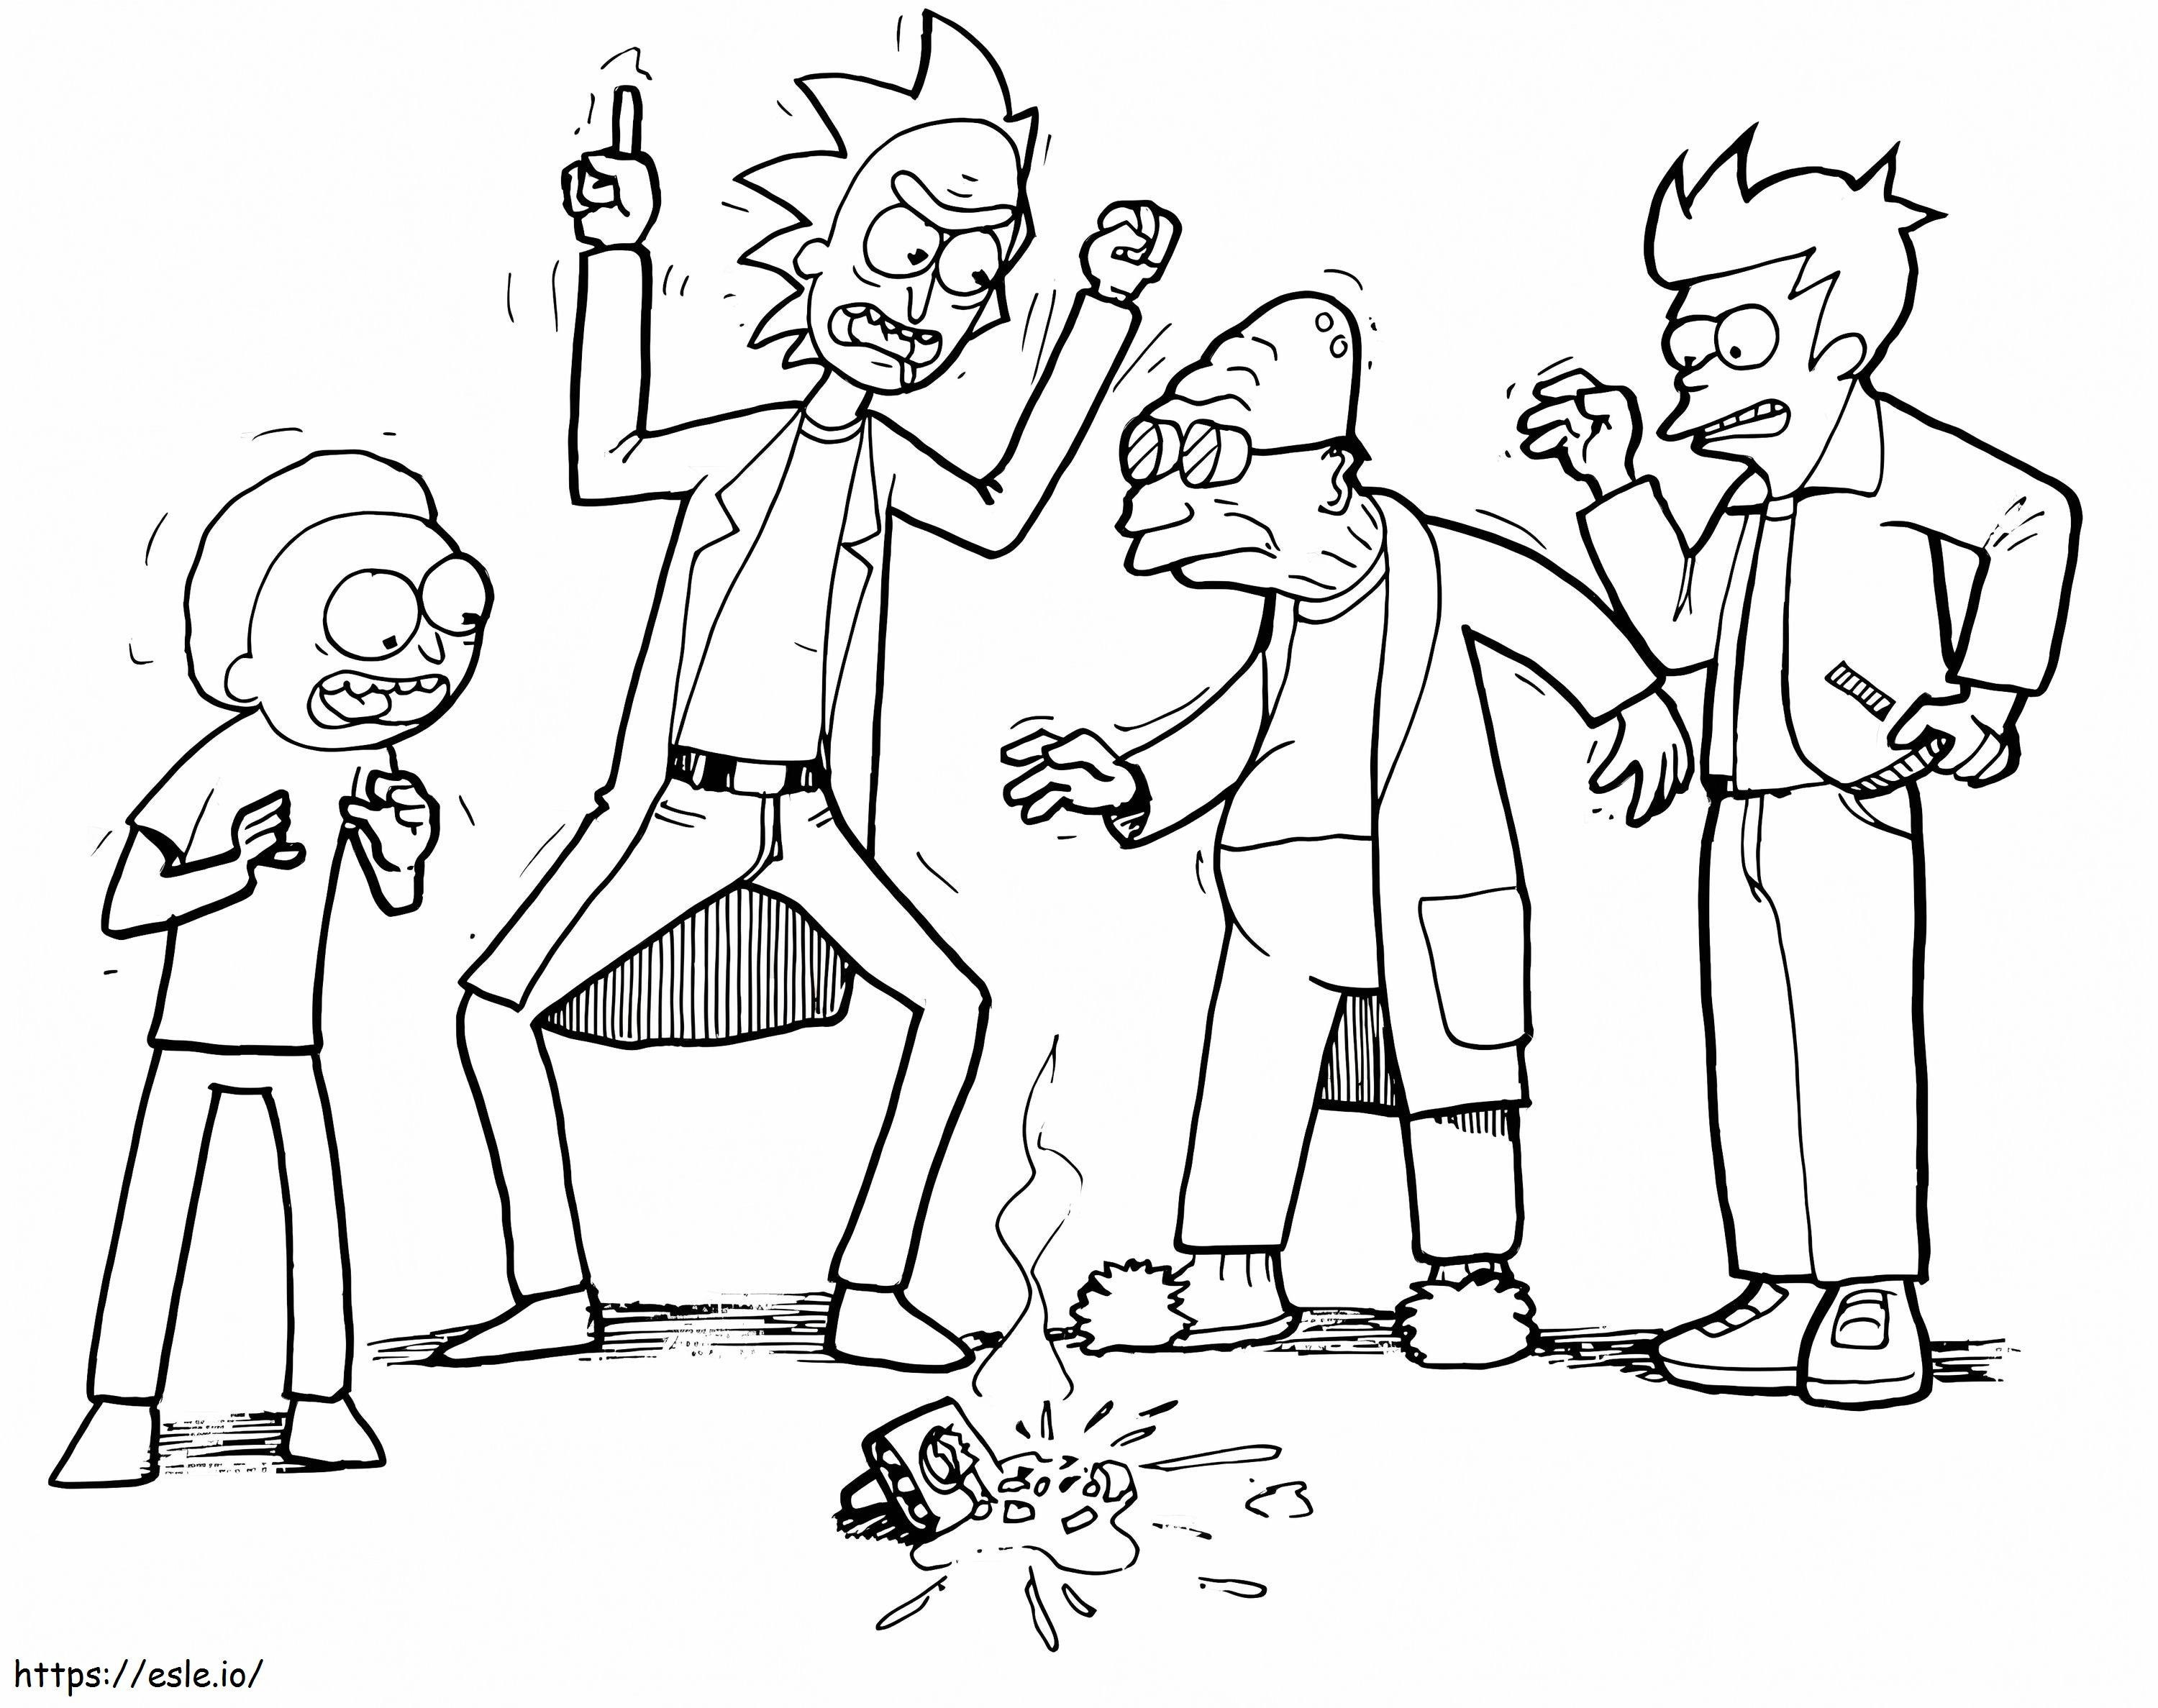 Rick Sanchez Angry And Friend coloring page